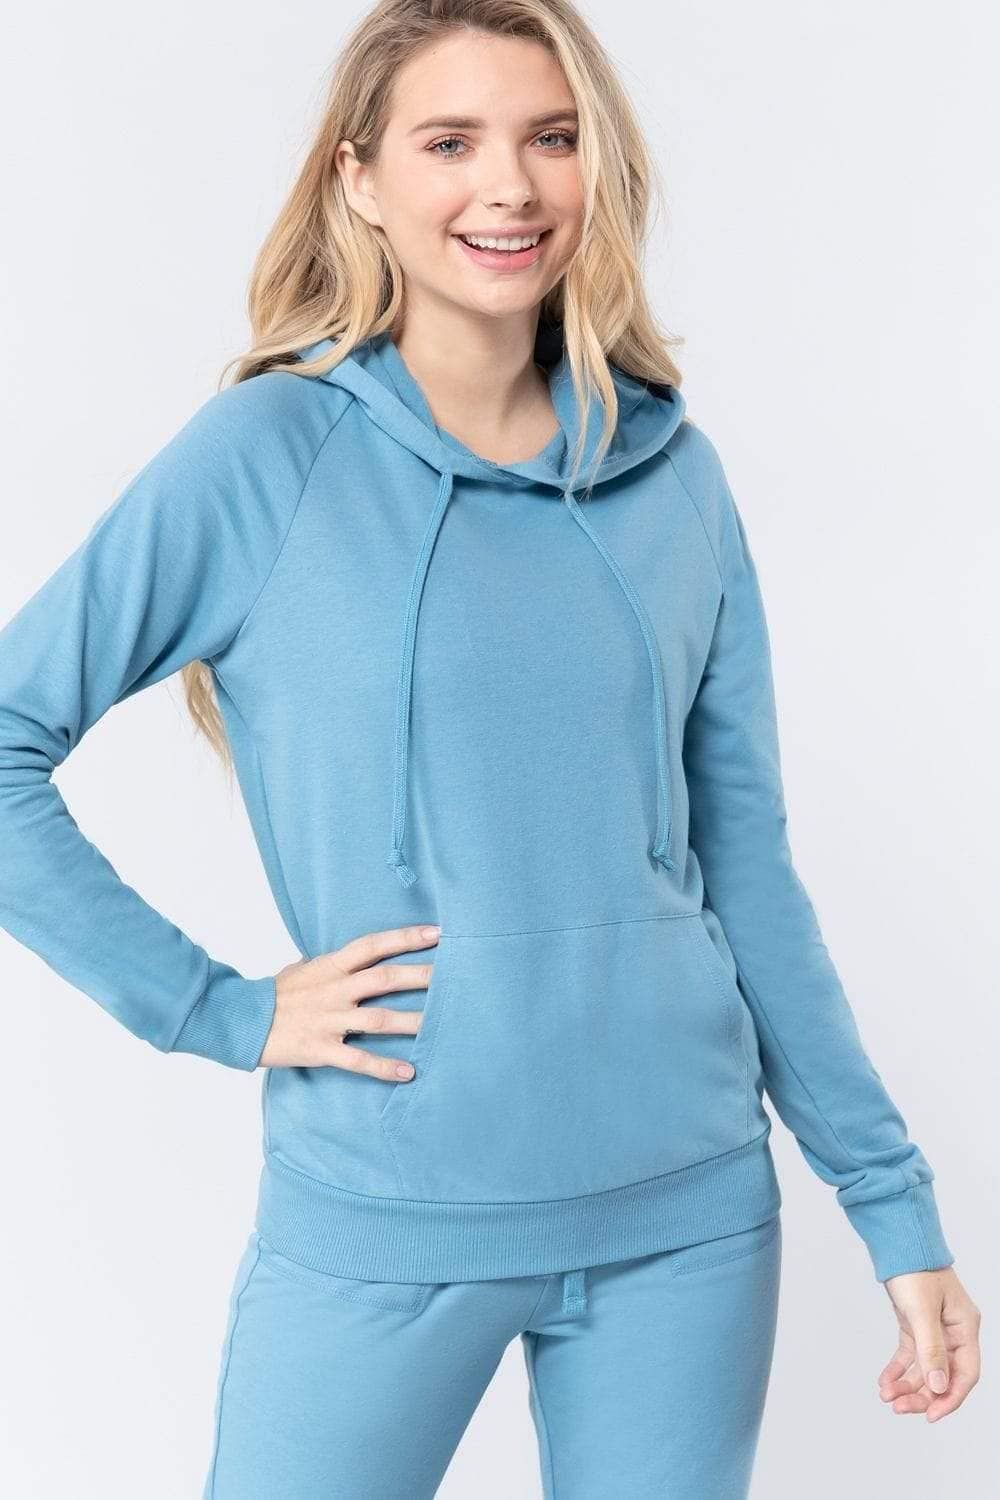 Topaz Long Sleeve French Terry Hooded Sweater - Shopping Therapy L Sweatshirt